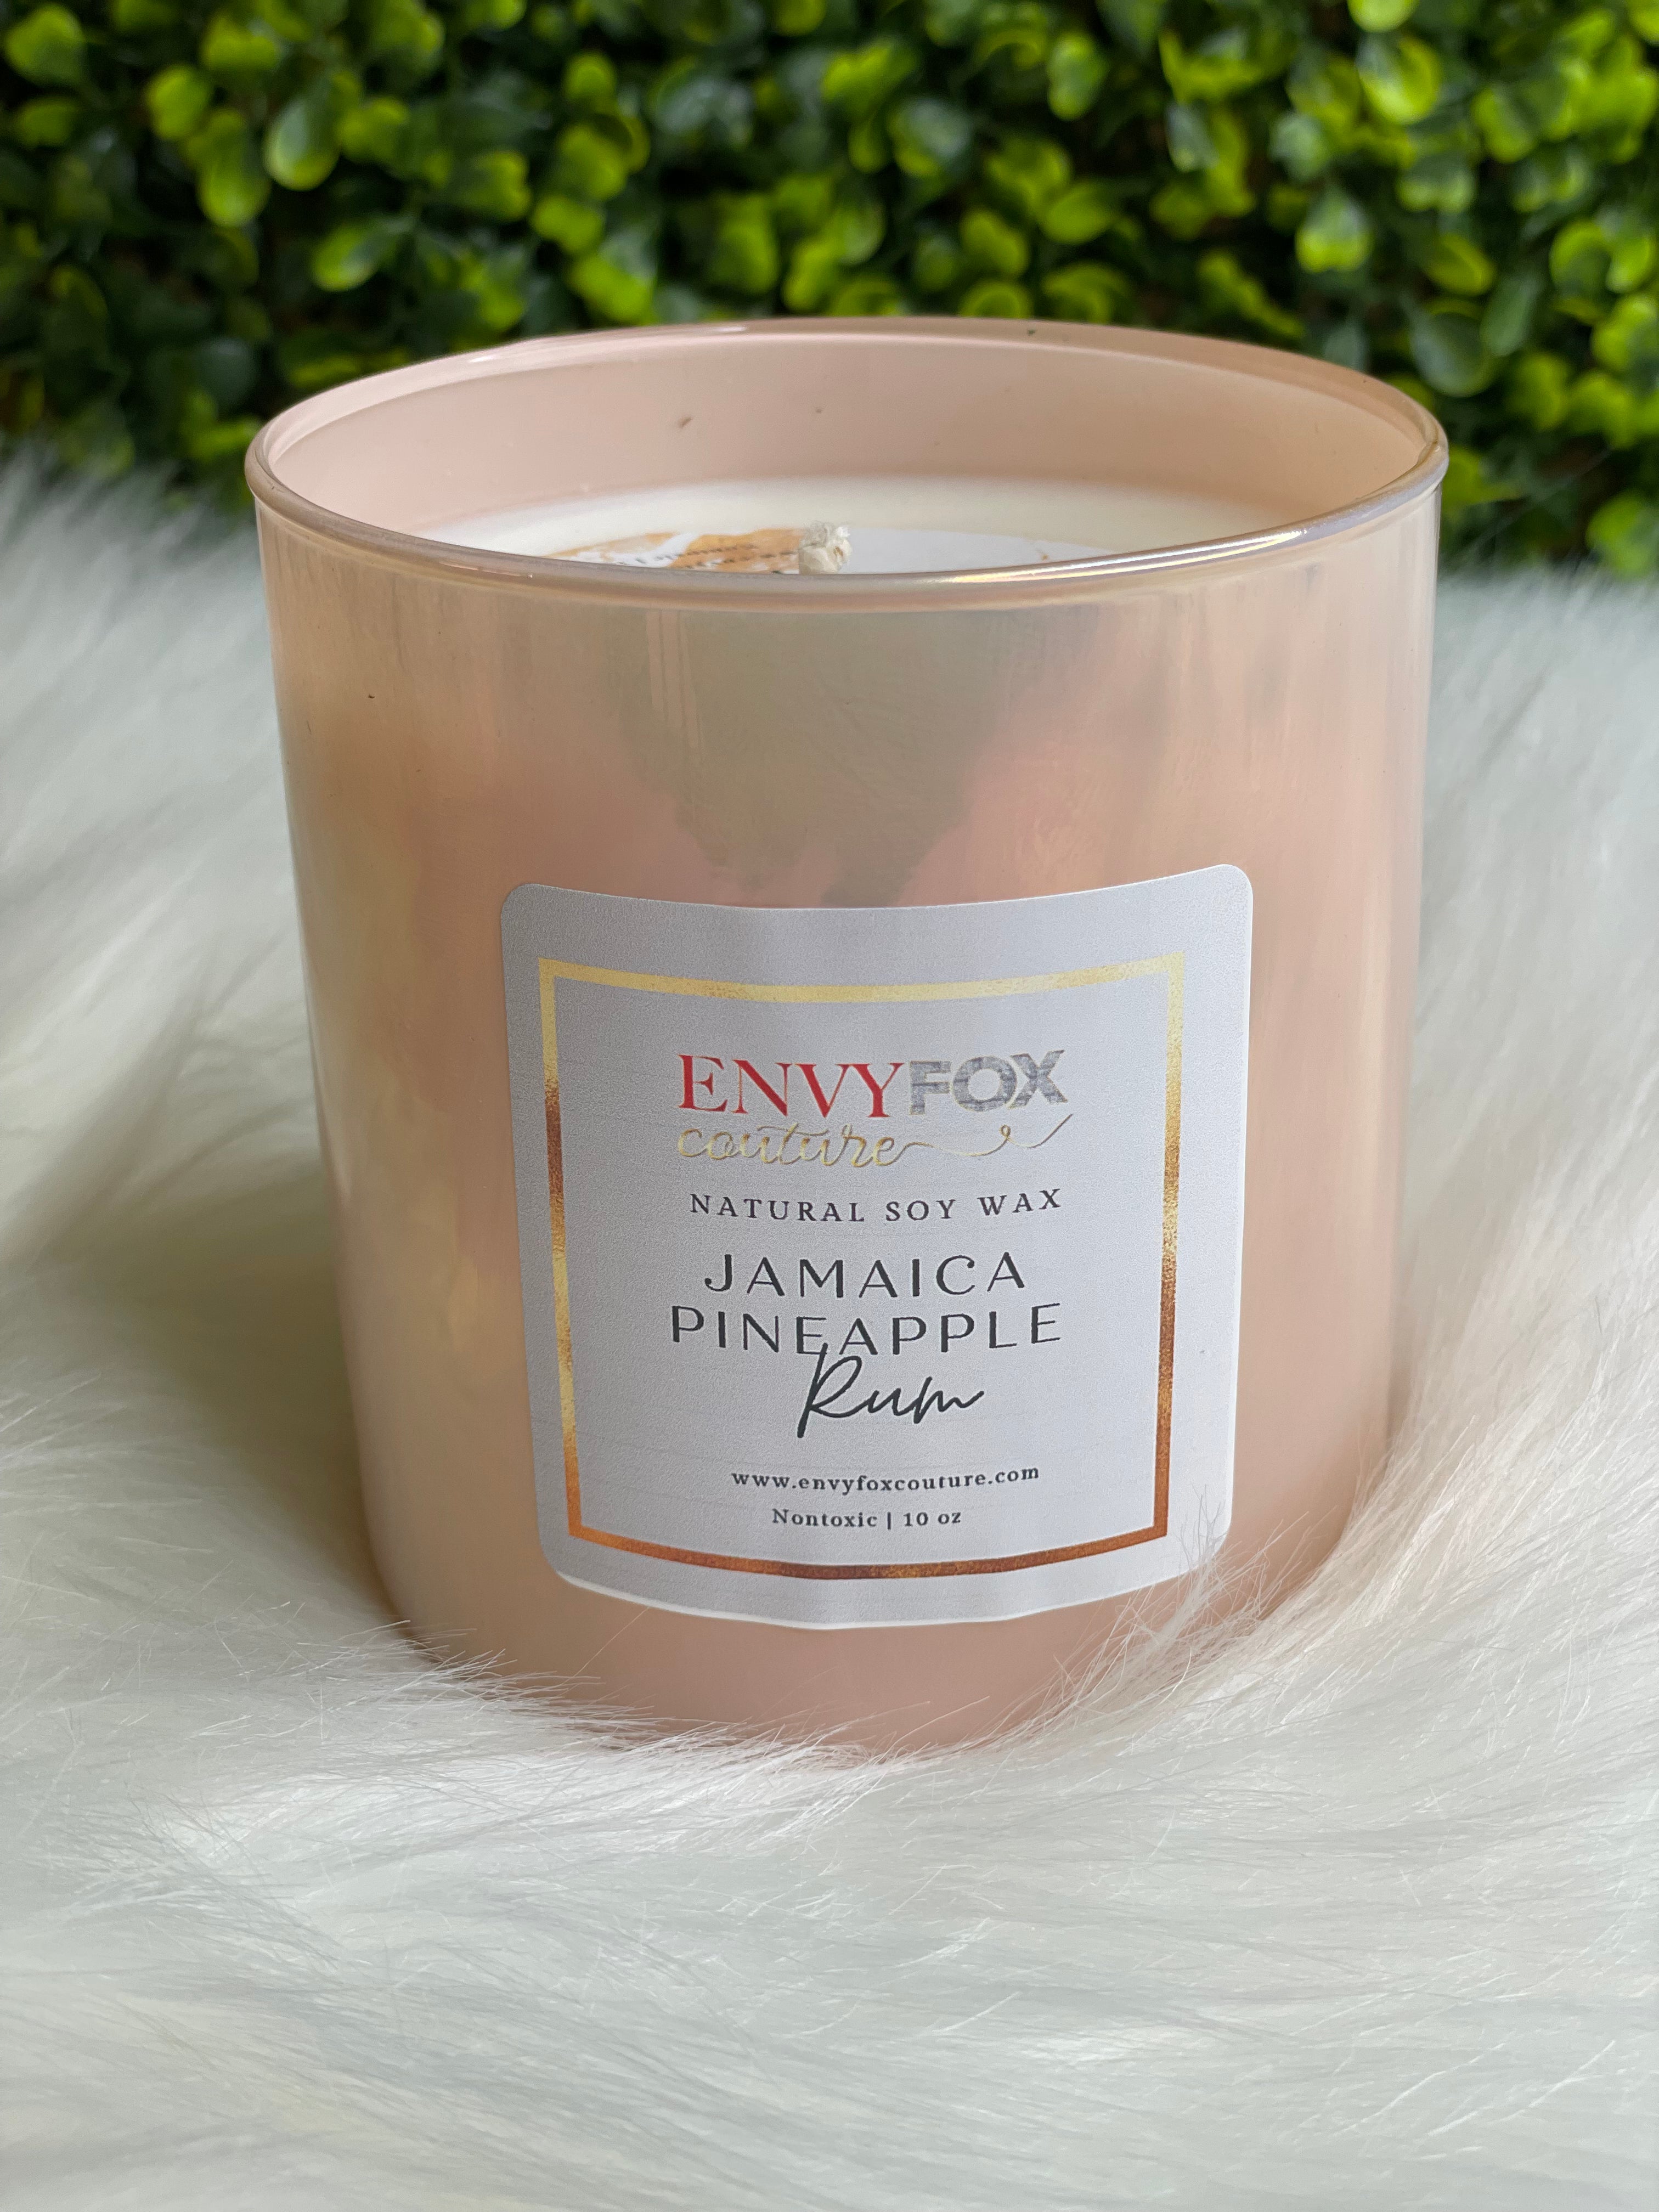 Jamaica Pineapple Rum 10 oz Natural Soy Wax Candle